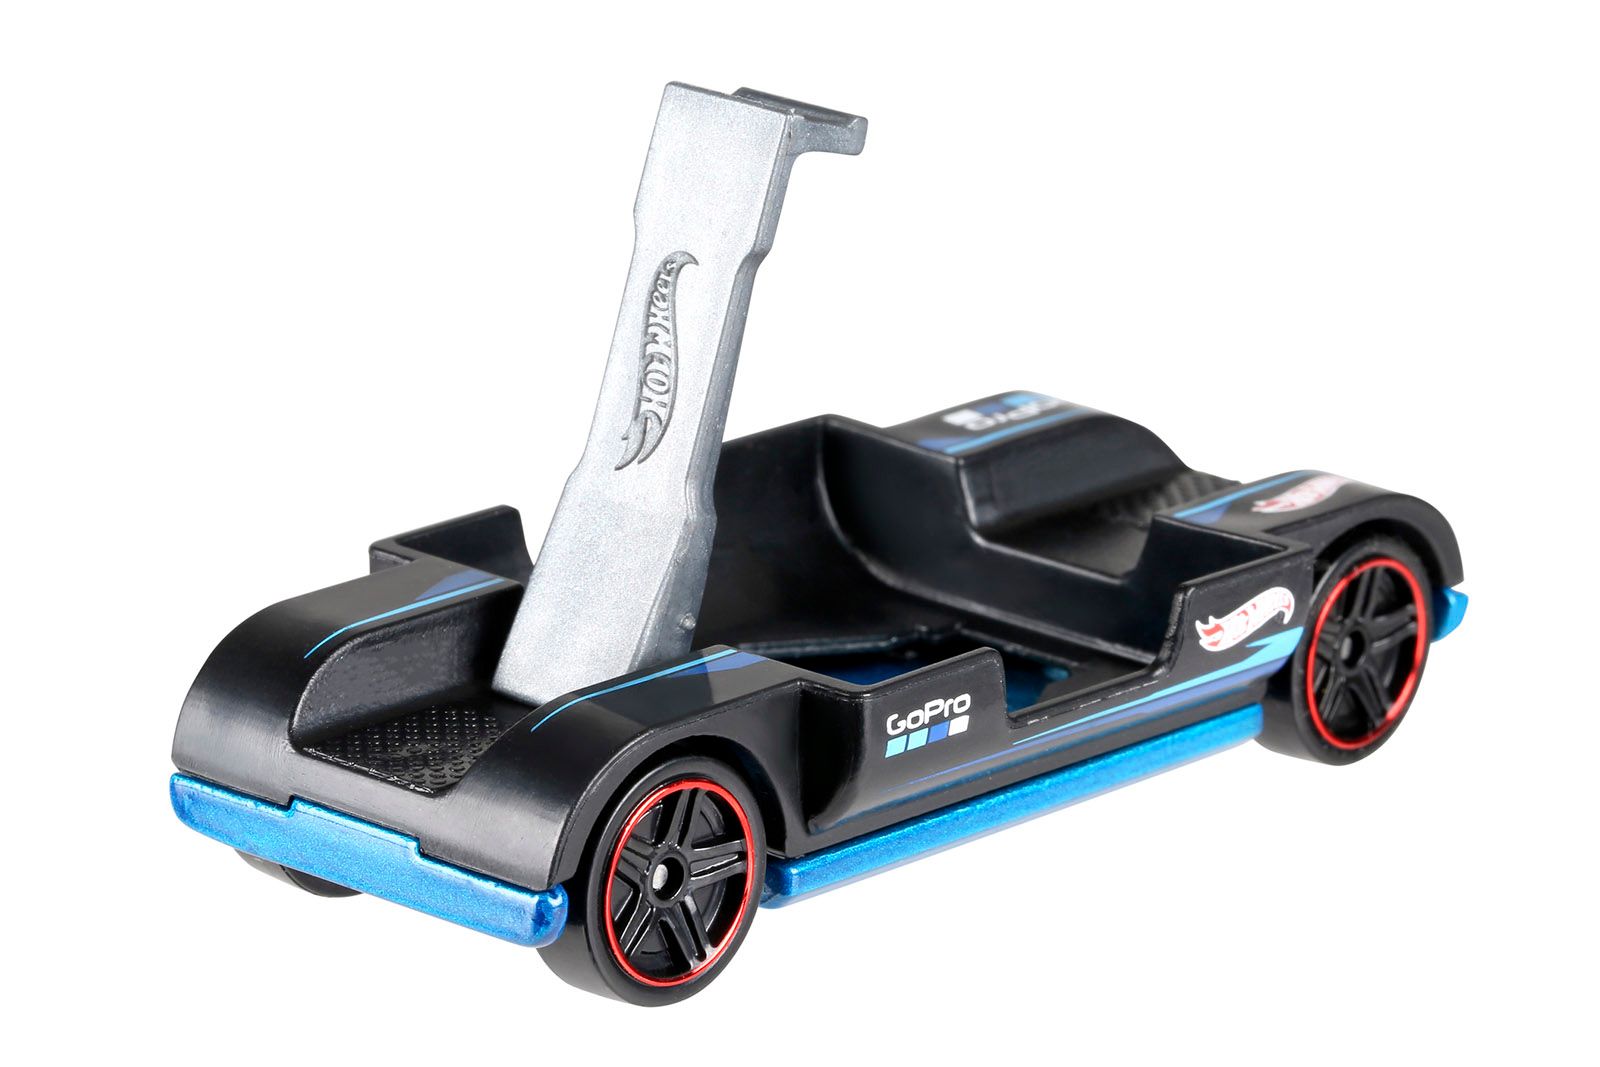 GoPro toy car lets you film your Hot Wheels stunts image 1